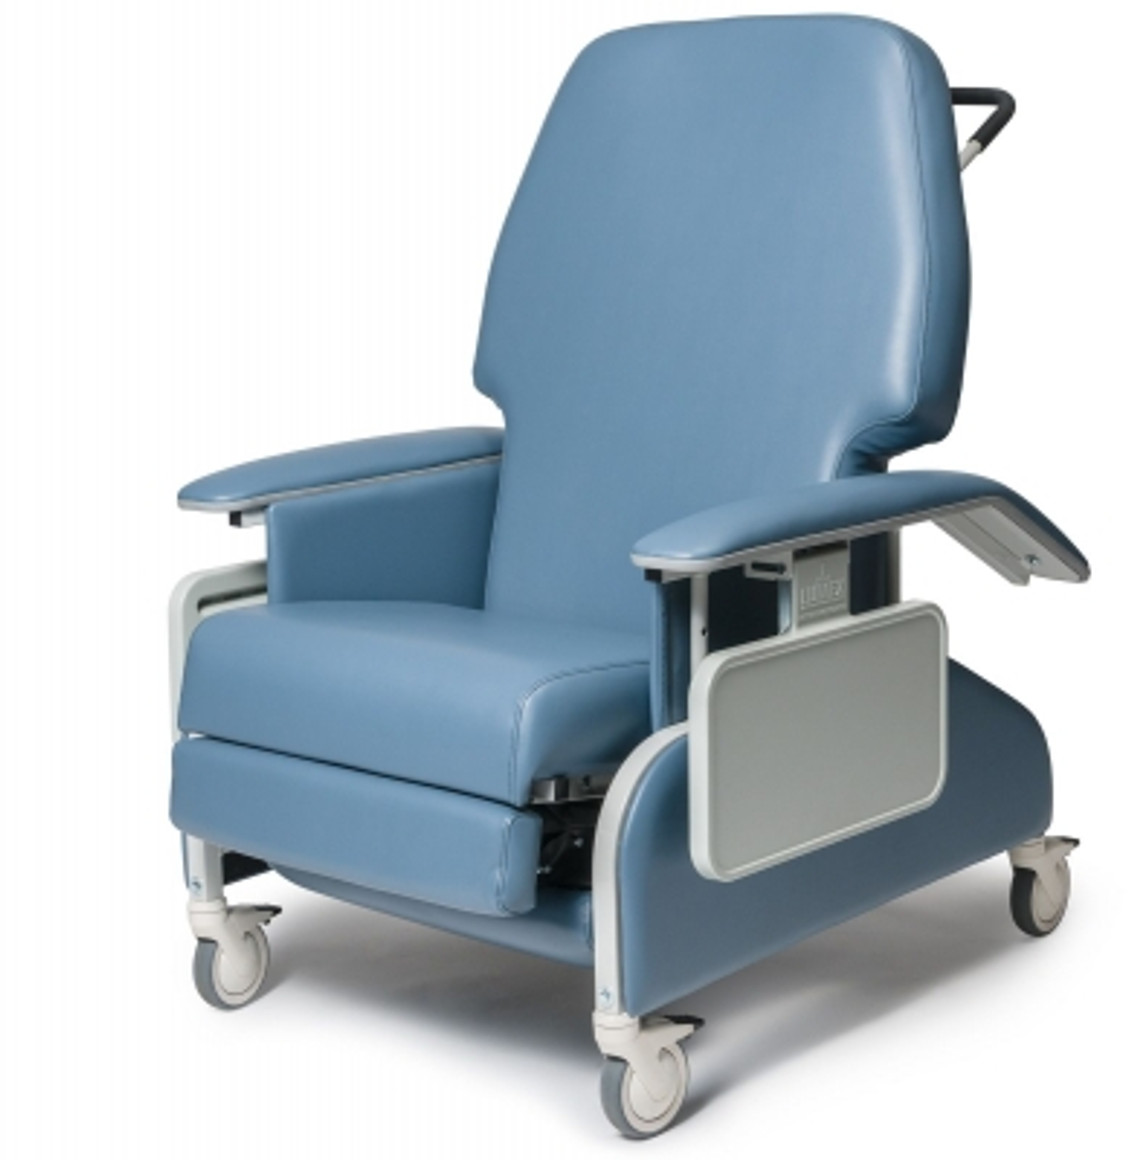 Lumex Extra-Wide, Drop Arm, Clinical Care Recliner, Imperial Blue